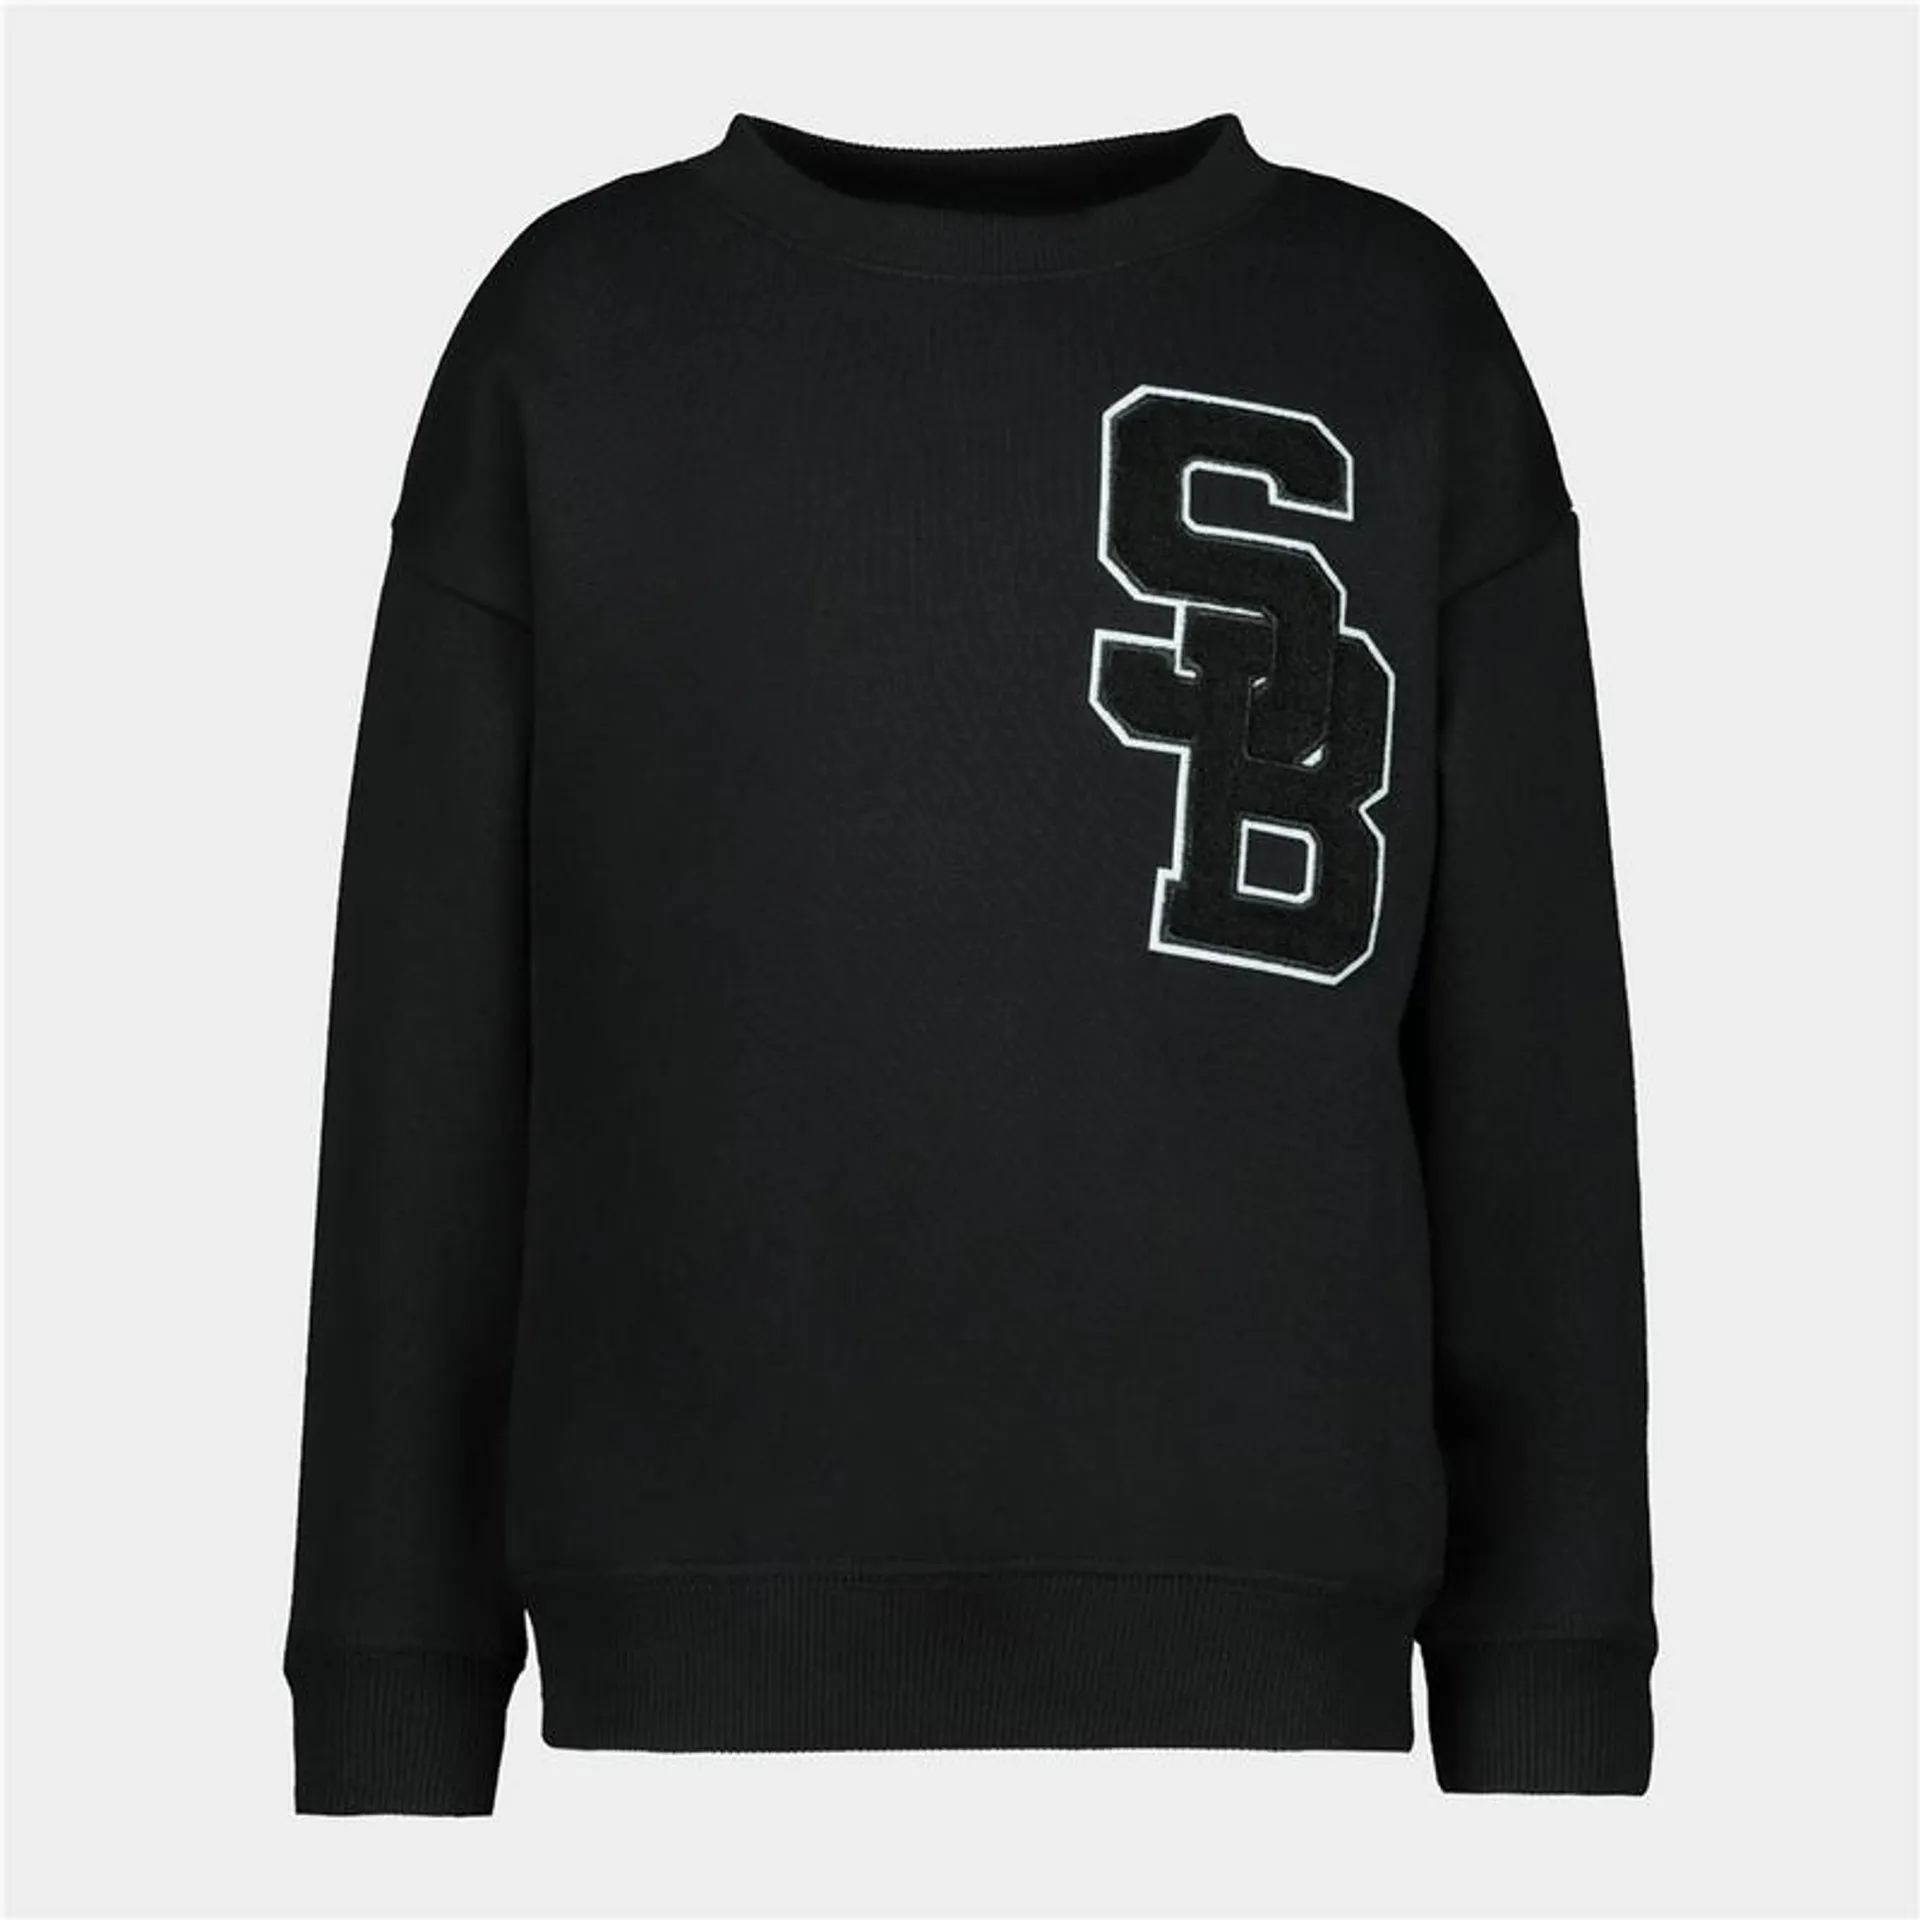 Younger Boys Crew Sweat Top